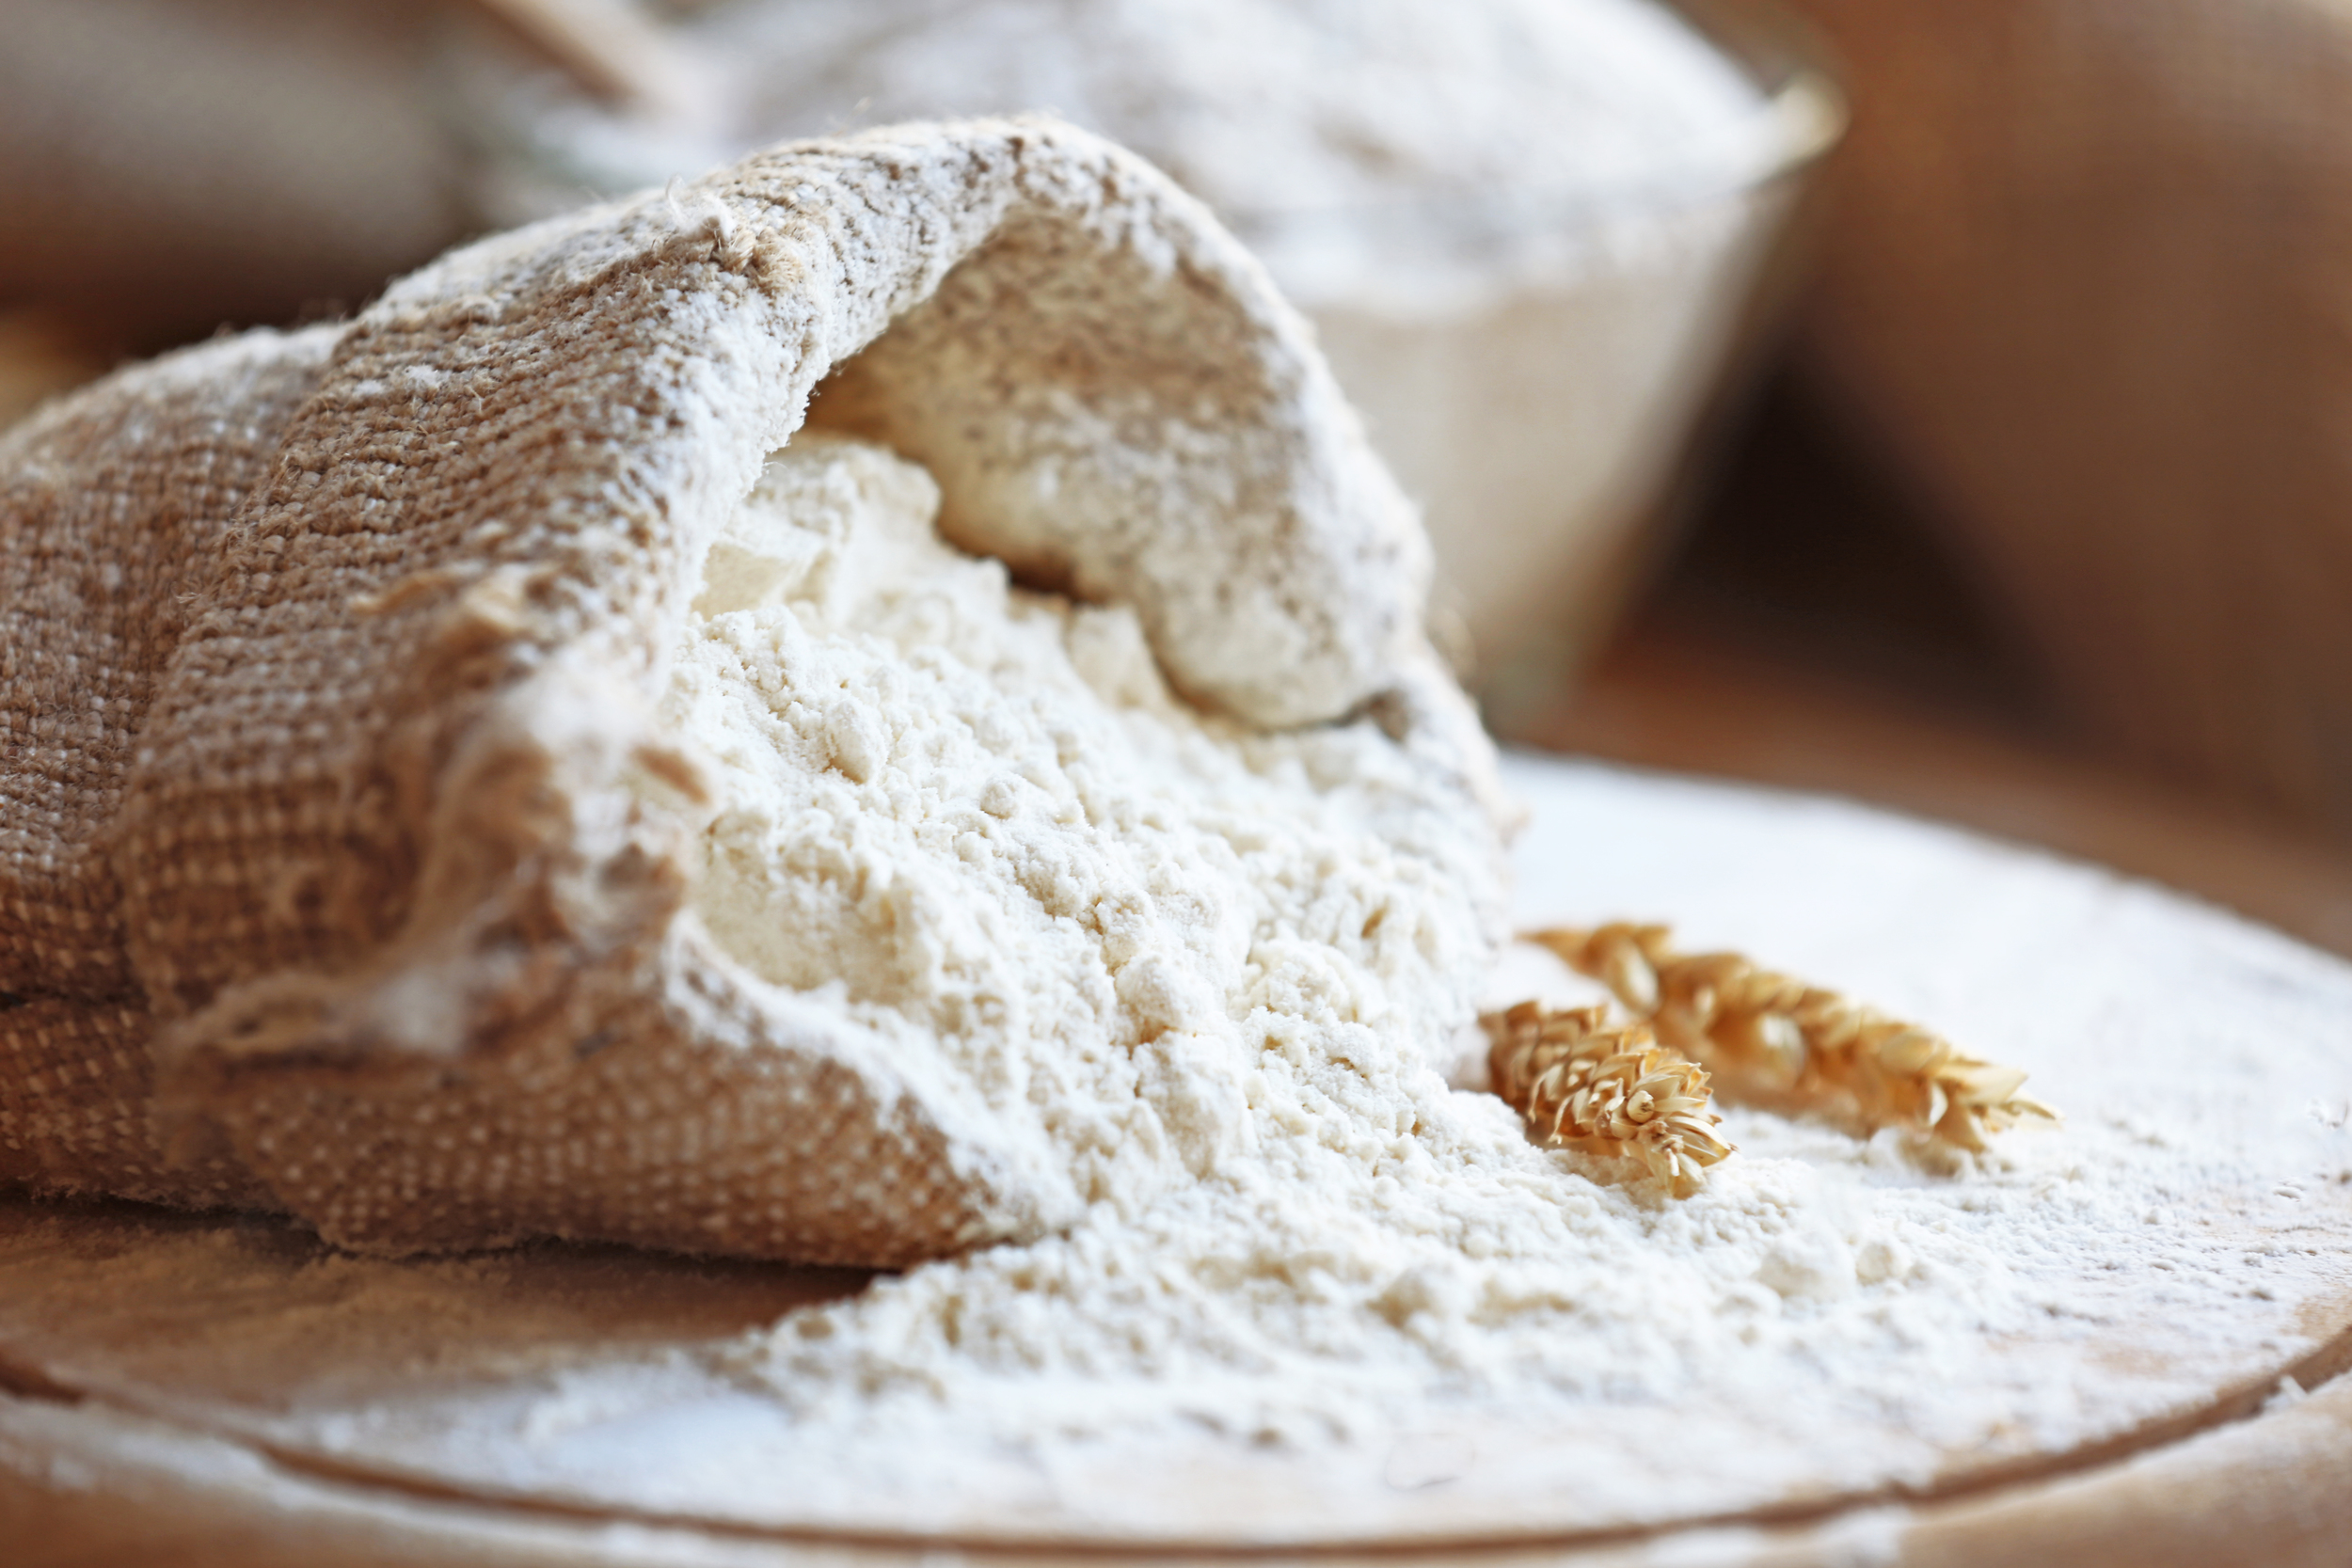 Flour, Grains, and Yeast